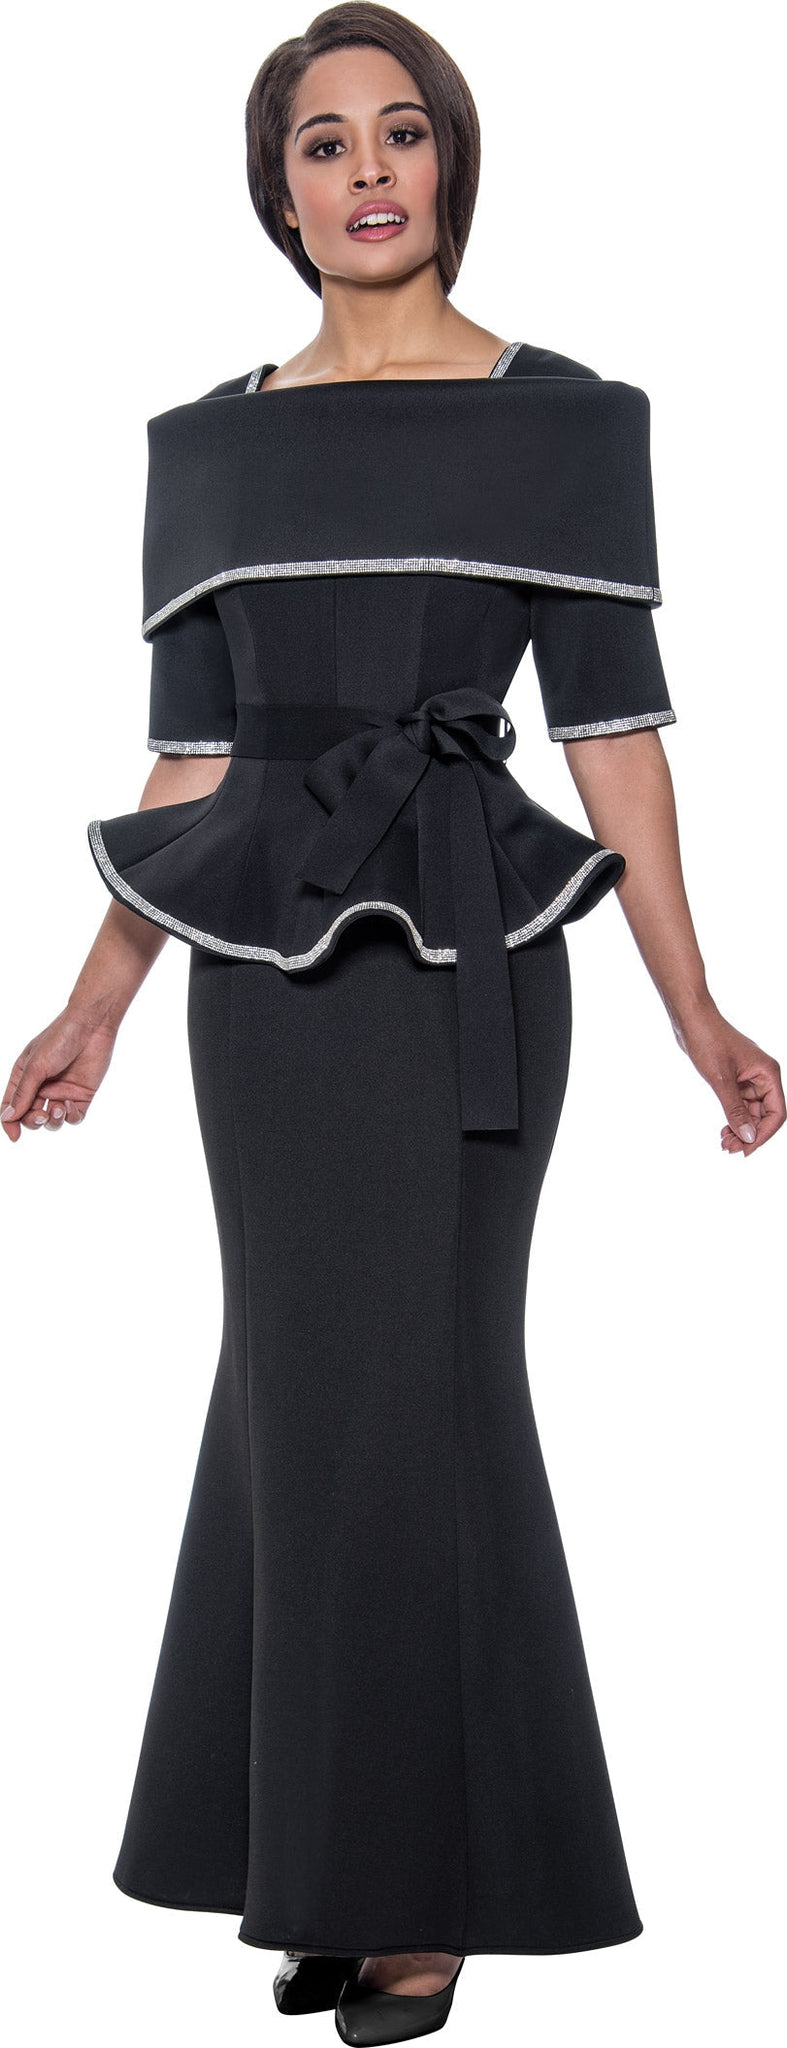 Stellar Looks Skirt Suit 1692-Black - Church Suits For Less